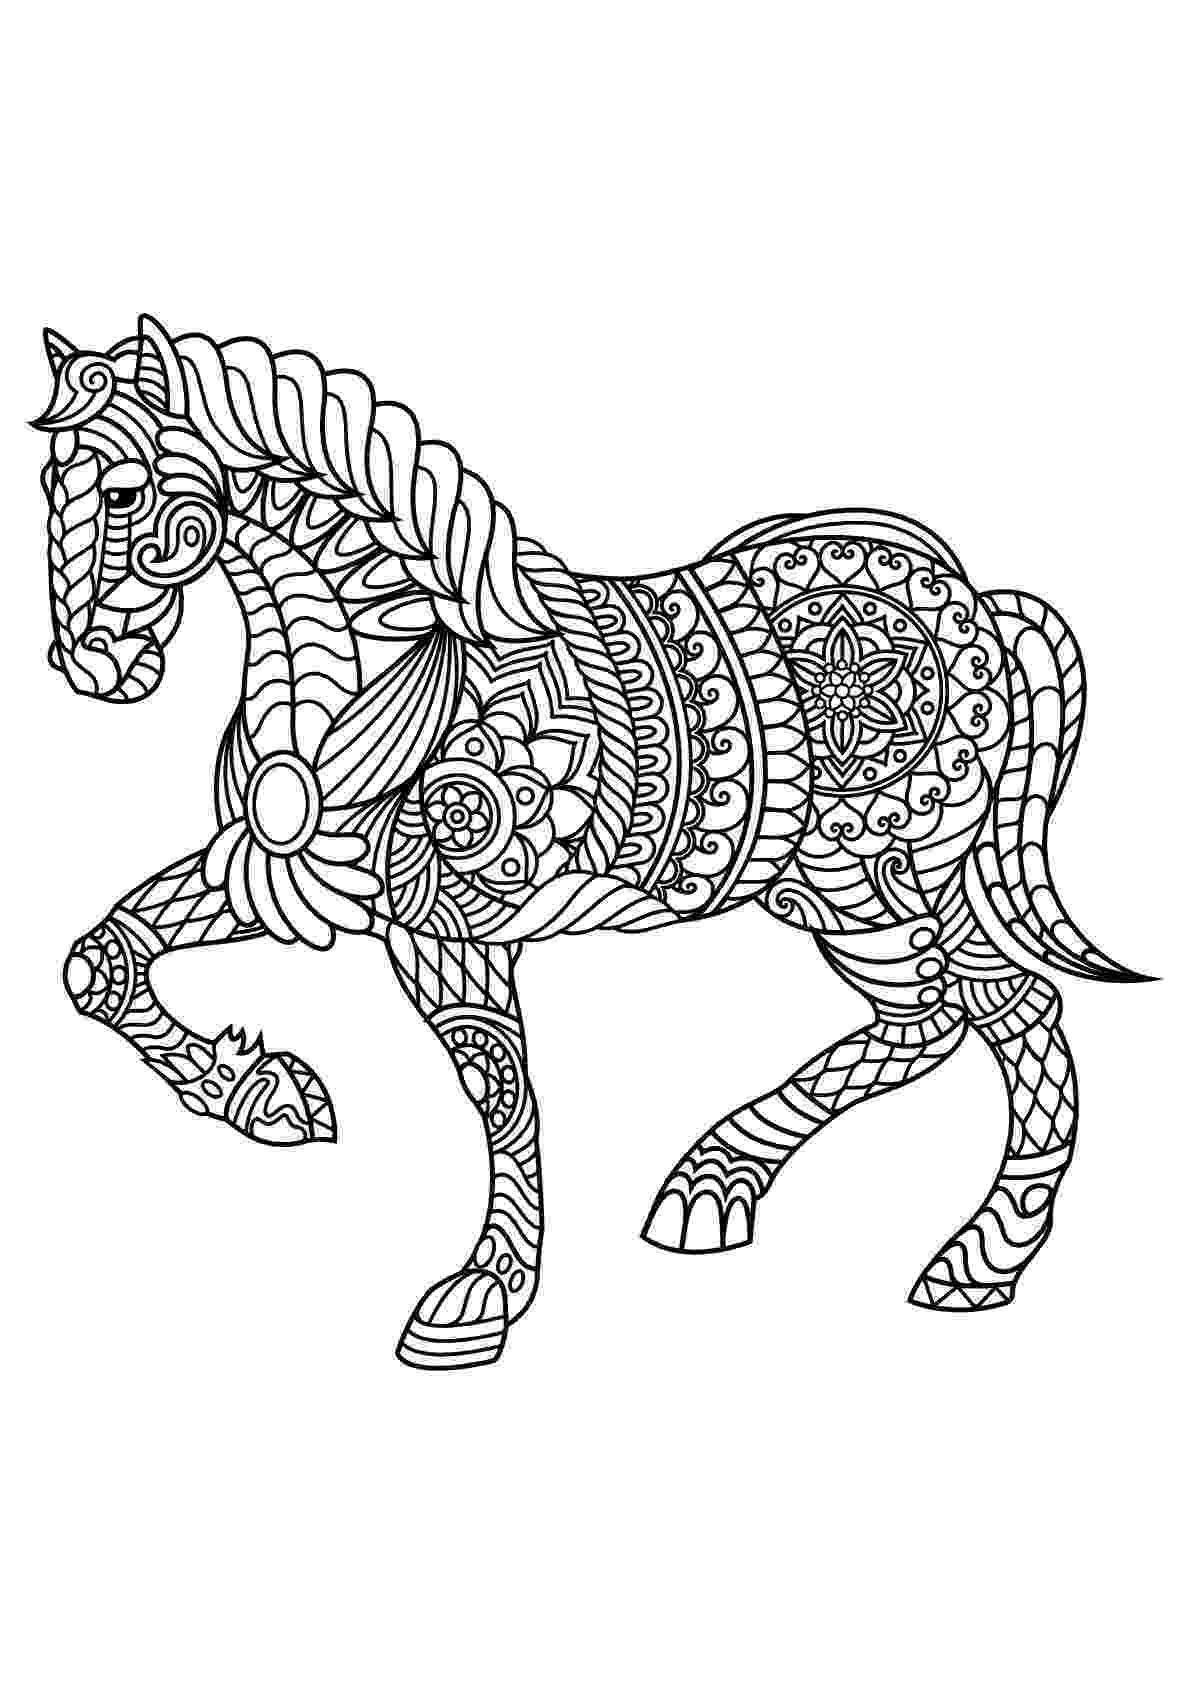 horse colouring pages for adults horse coloring pages for adults best coloring pages for kids adults colouring horse pages for 